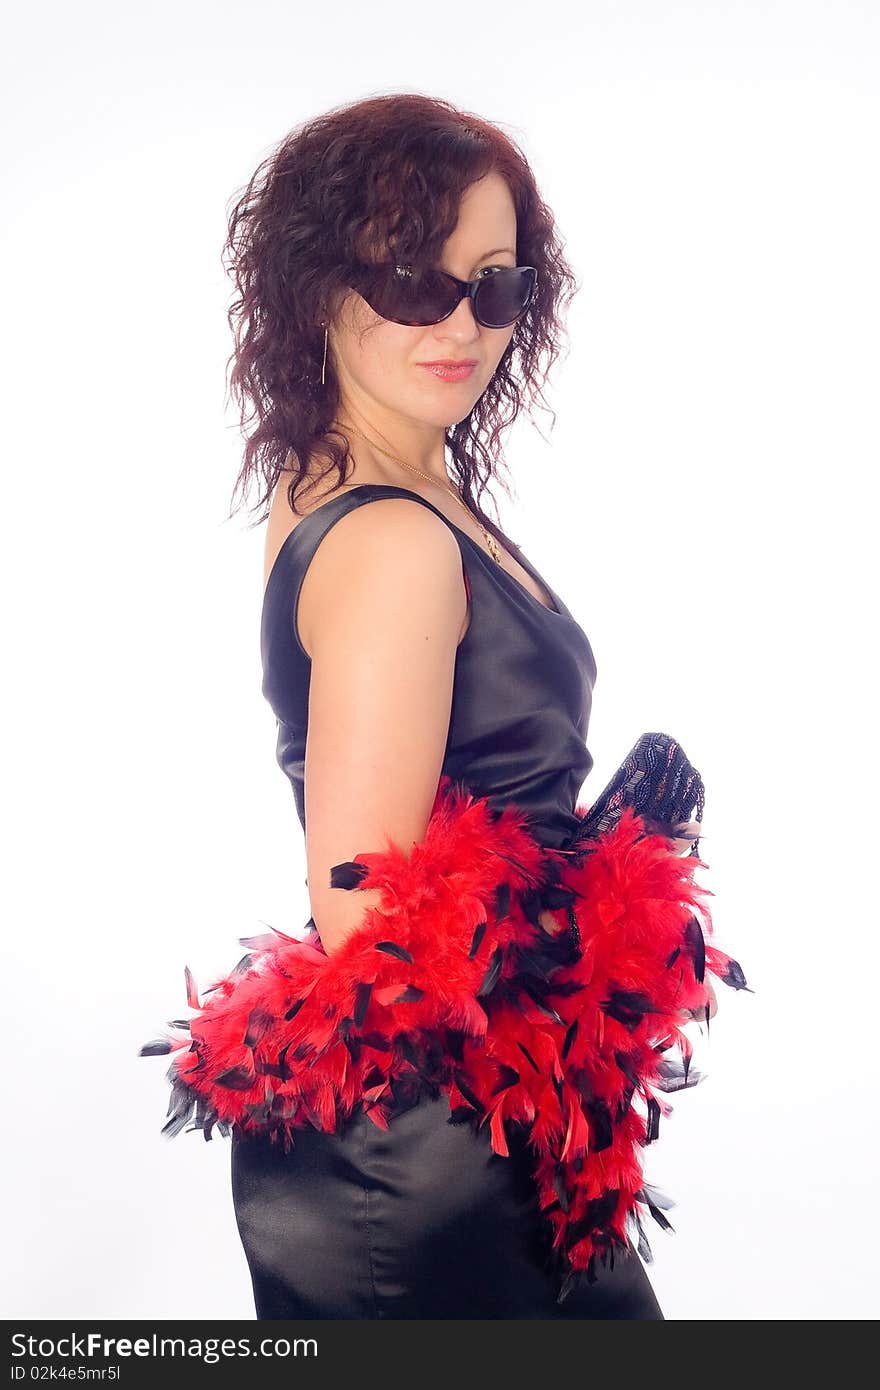 Classical lady wearing black sunglasess and red feathers